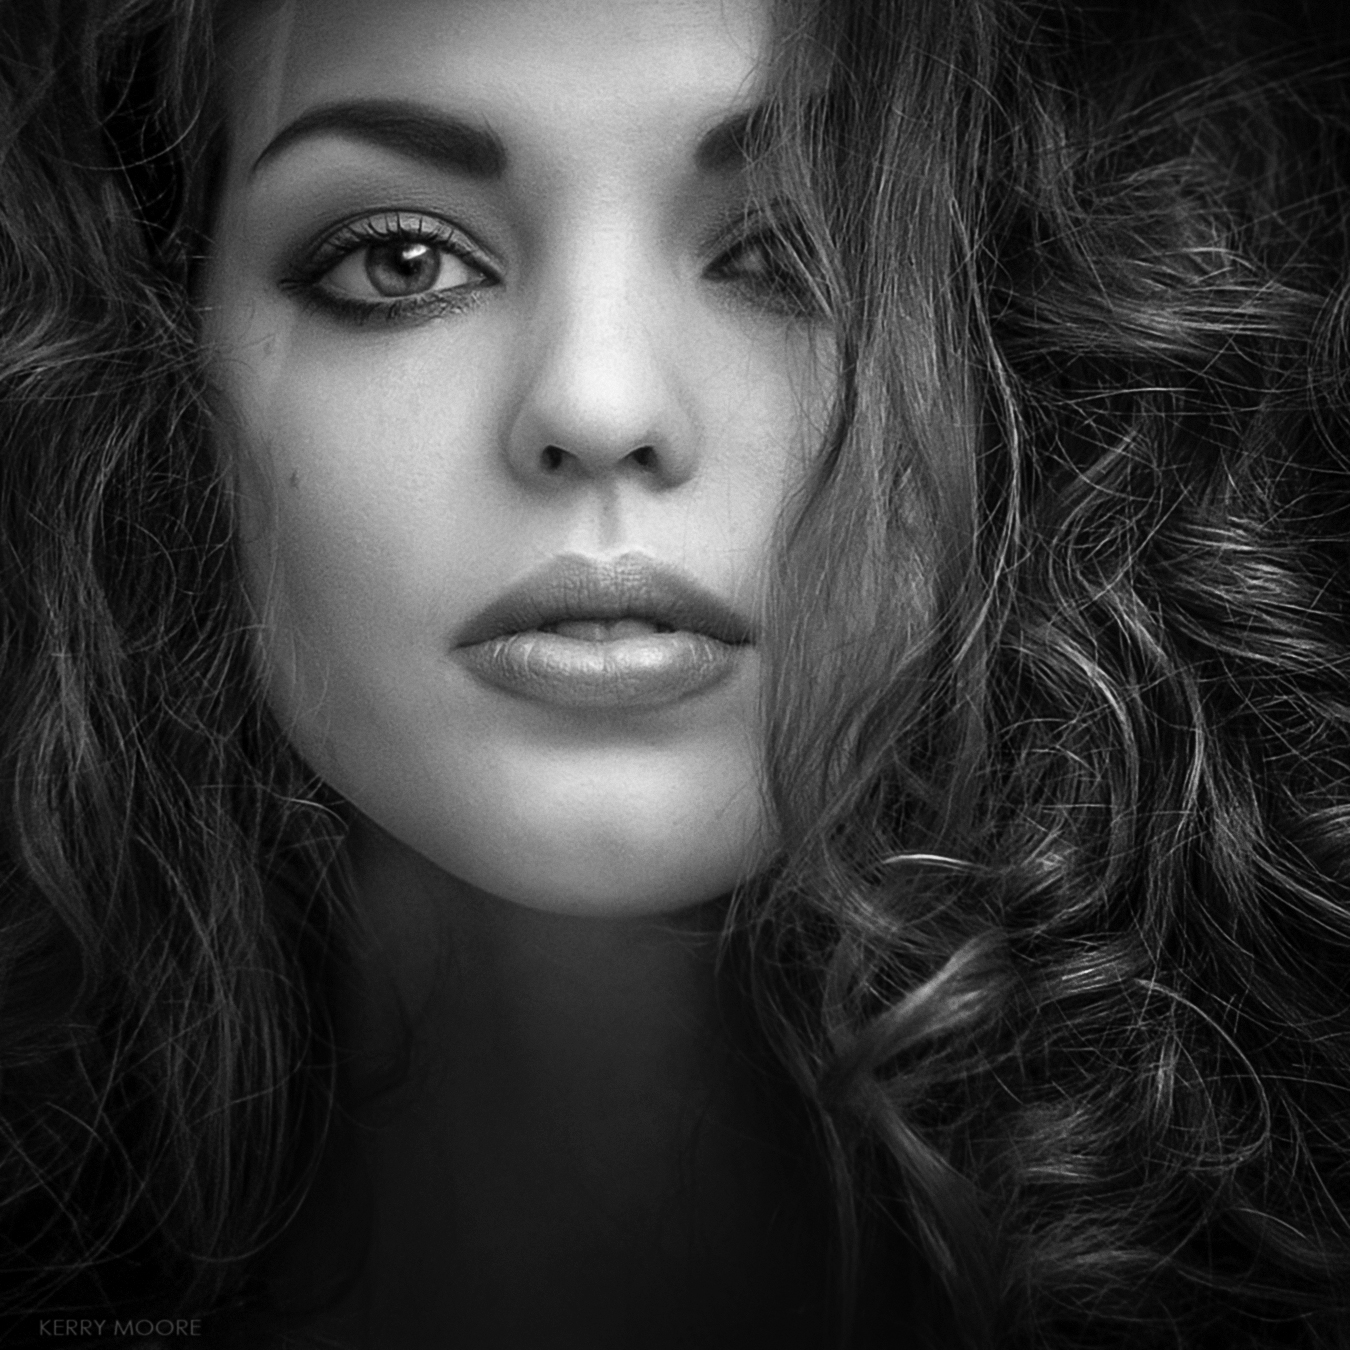 portrait, beauty, girl, model, eyes, woman, female, glamour, style, fashion, face, black and white, monochrome, light,  Kerry Moore